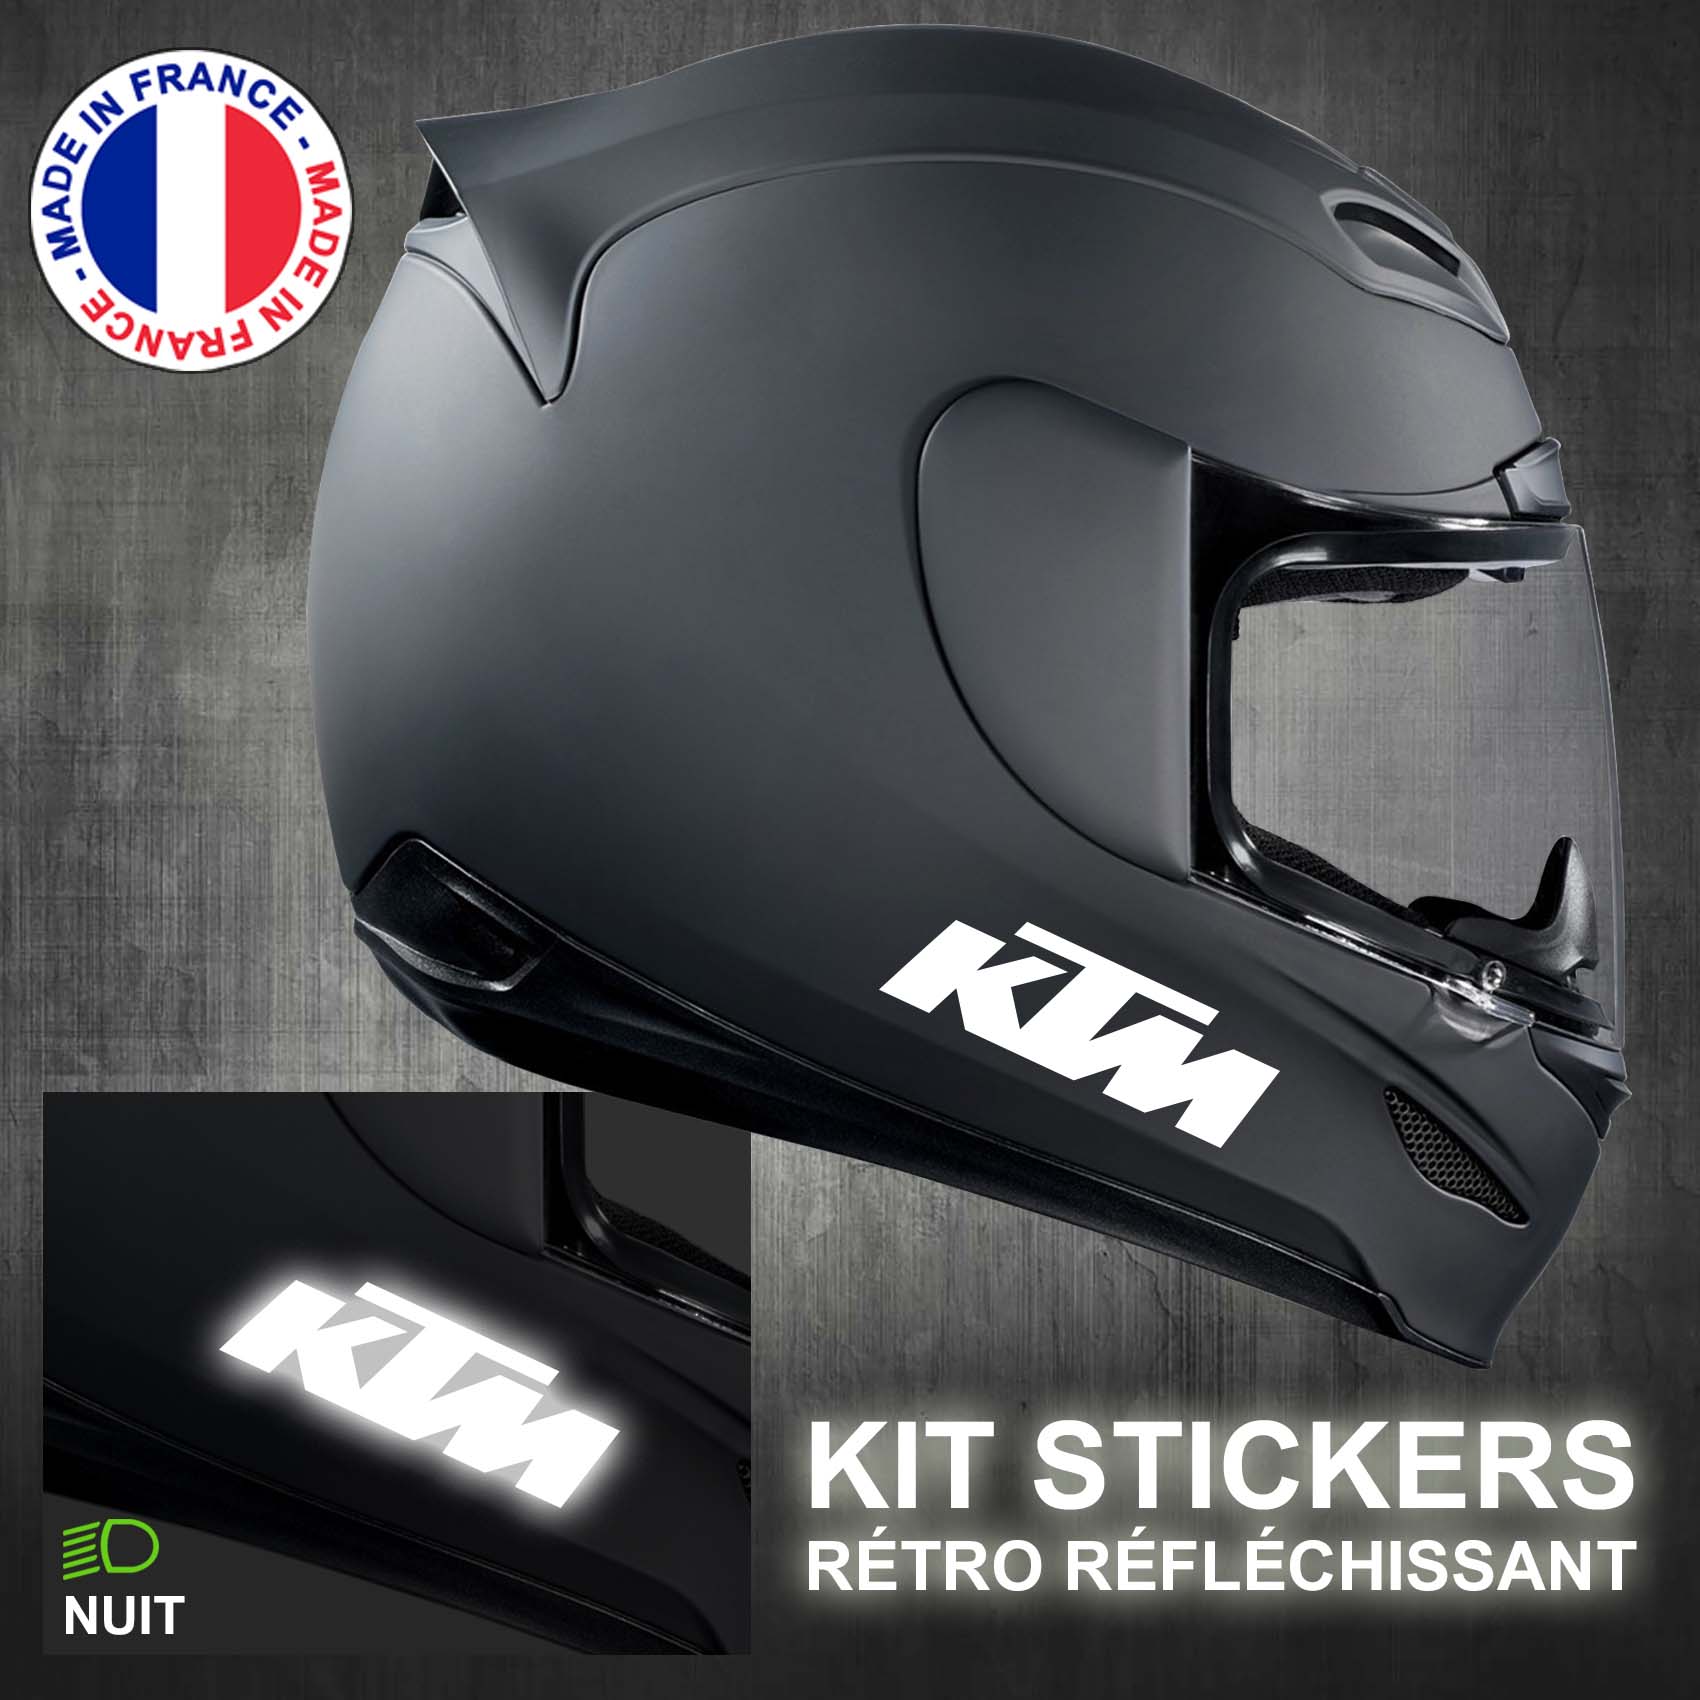 stickers-casque-moto-ktm-ref3-retro-reflechissant-autocollant-noir-moto-velo-tuning-racing-route-sticker-casques-adhesif-scooter-nuit-securite-decals-personnalise-personnalisable-min